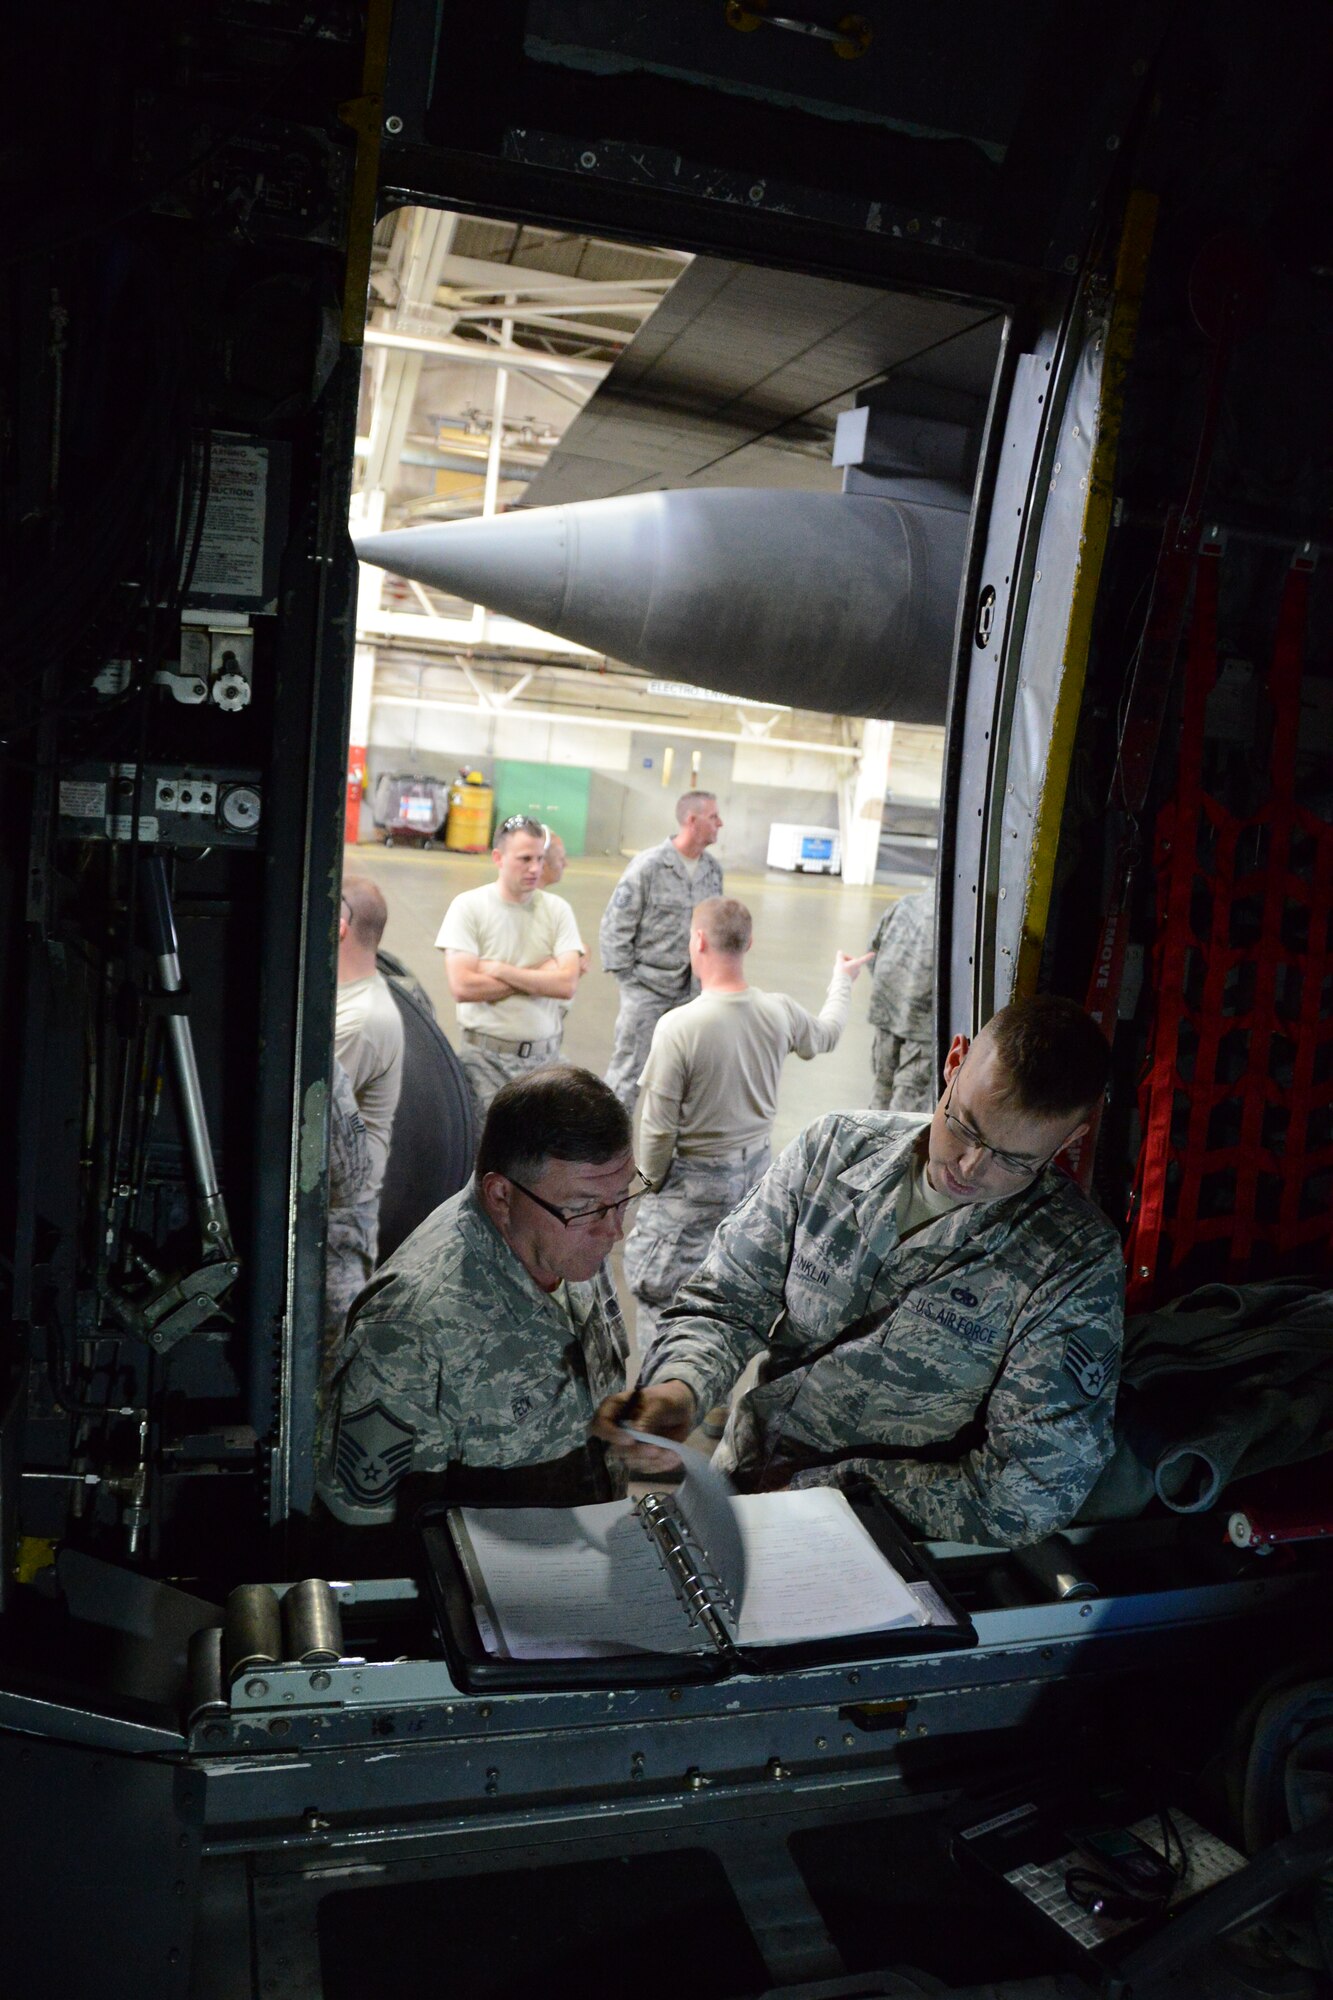 Master Sgt. Eric Peck, left, of the 103rd Maintenance Group, is introduced to a maintenance log for the unit’s newly-assigned C-130H Hercules by instructor Staff Sgt. Kurtis Franklin Friday, Oct. 25, 2013. This is the first out of eight C-130H model aircraft expected to be assigned to the 103rd Airlift Wing at Bradley Air National Guard Base, East Granby, Conn., and that the unit will operate in support of foreign and domestic airlift missions. (U.S. Air National Guard photo by Master Sgt. Erin E. McNamara) 